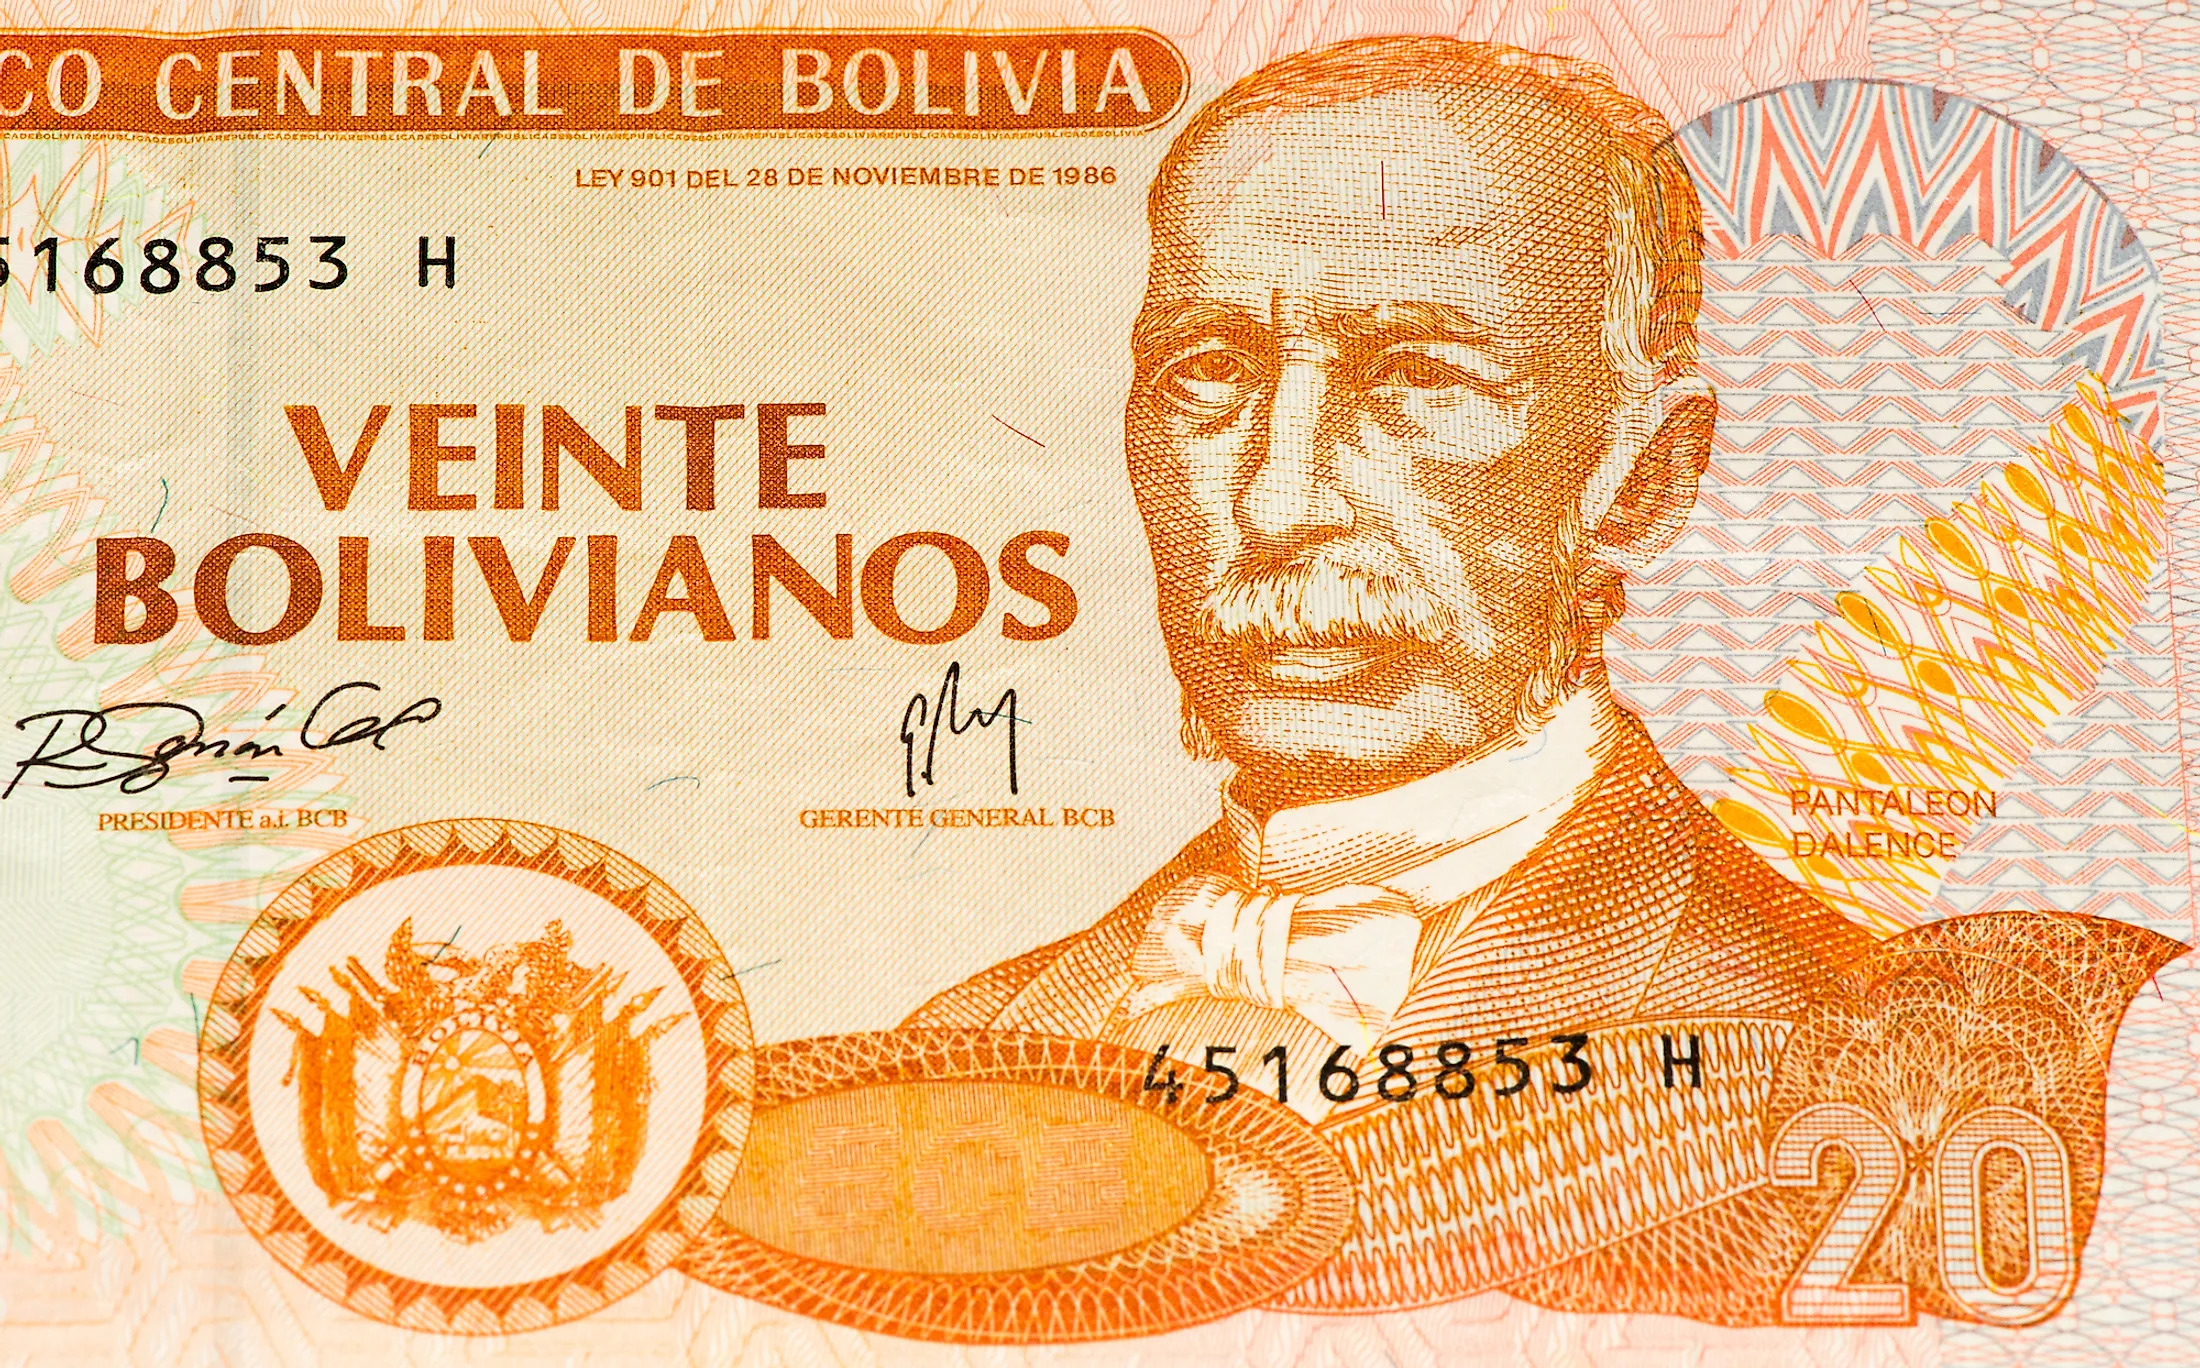 Bolivia ratifies that its economy is growing and affirms that it is heading for more stability. (Photo internet reproduction)